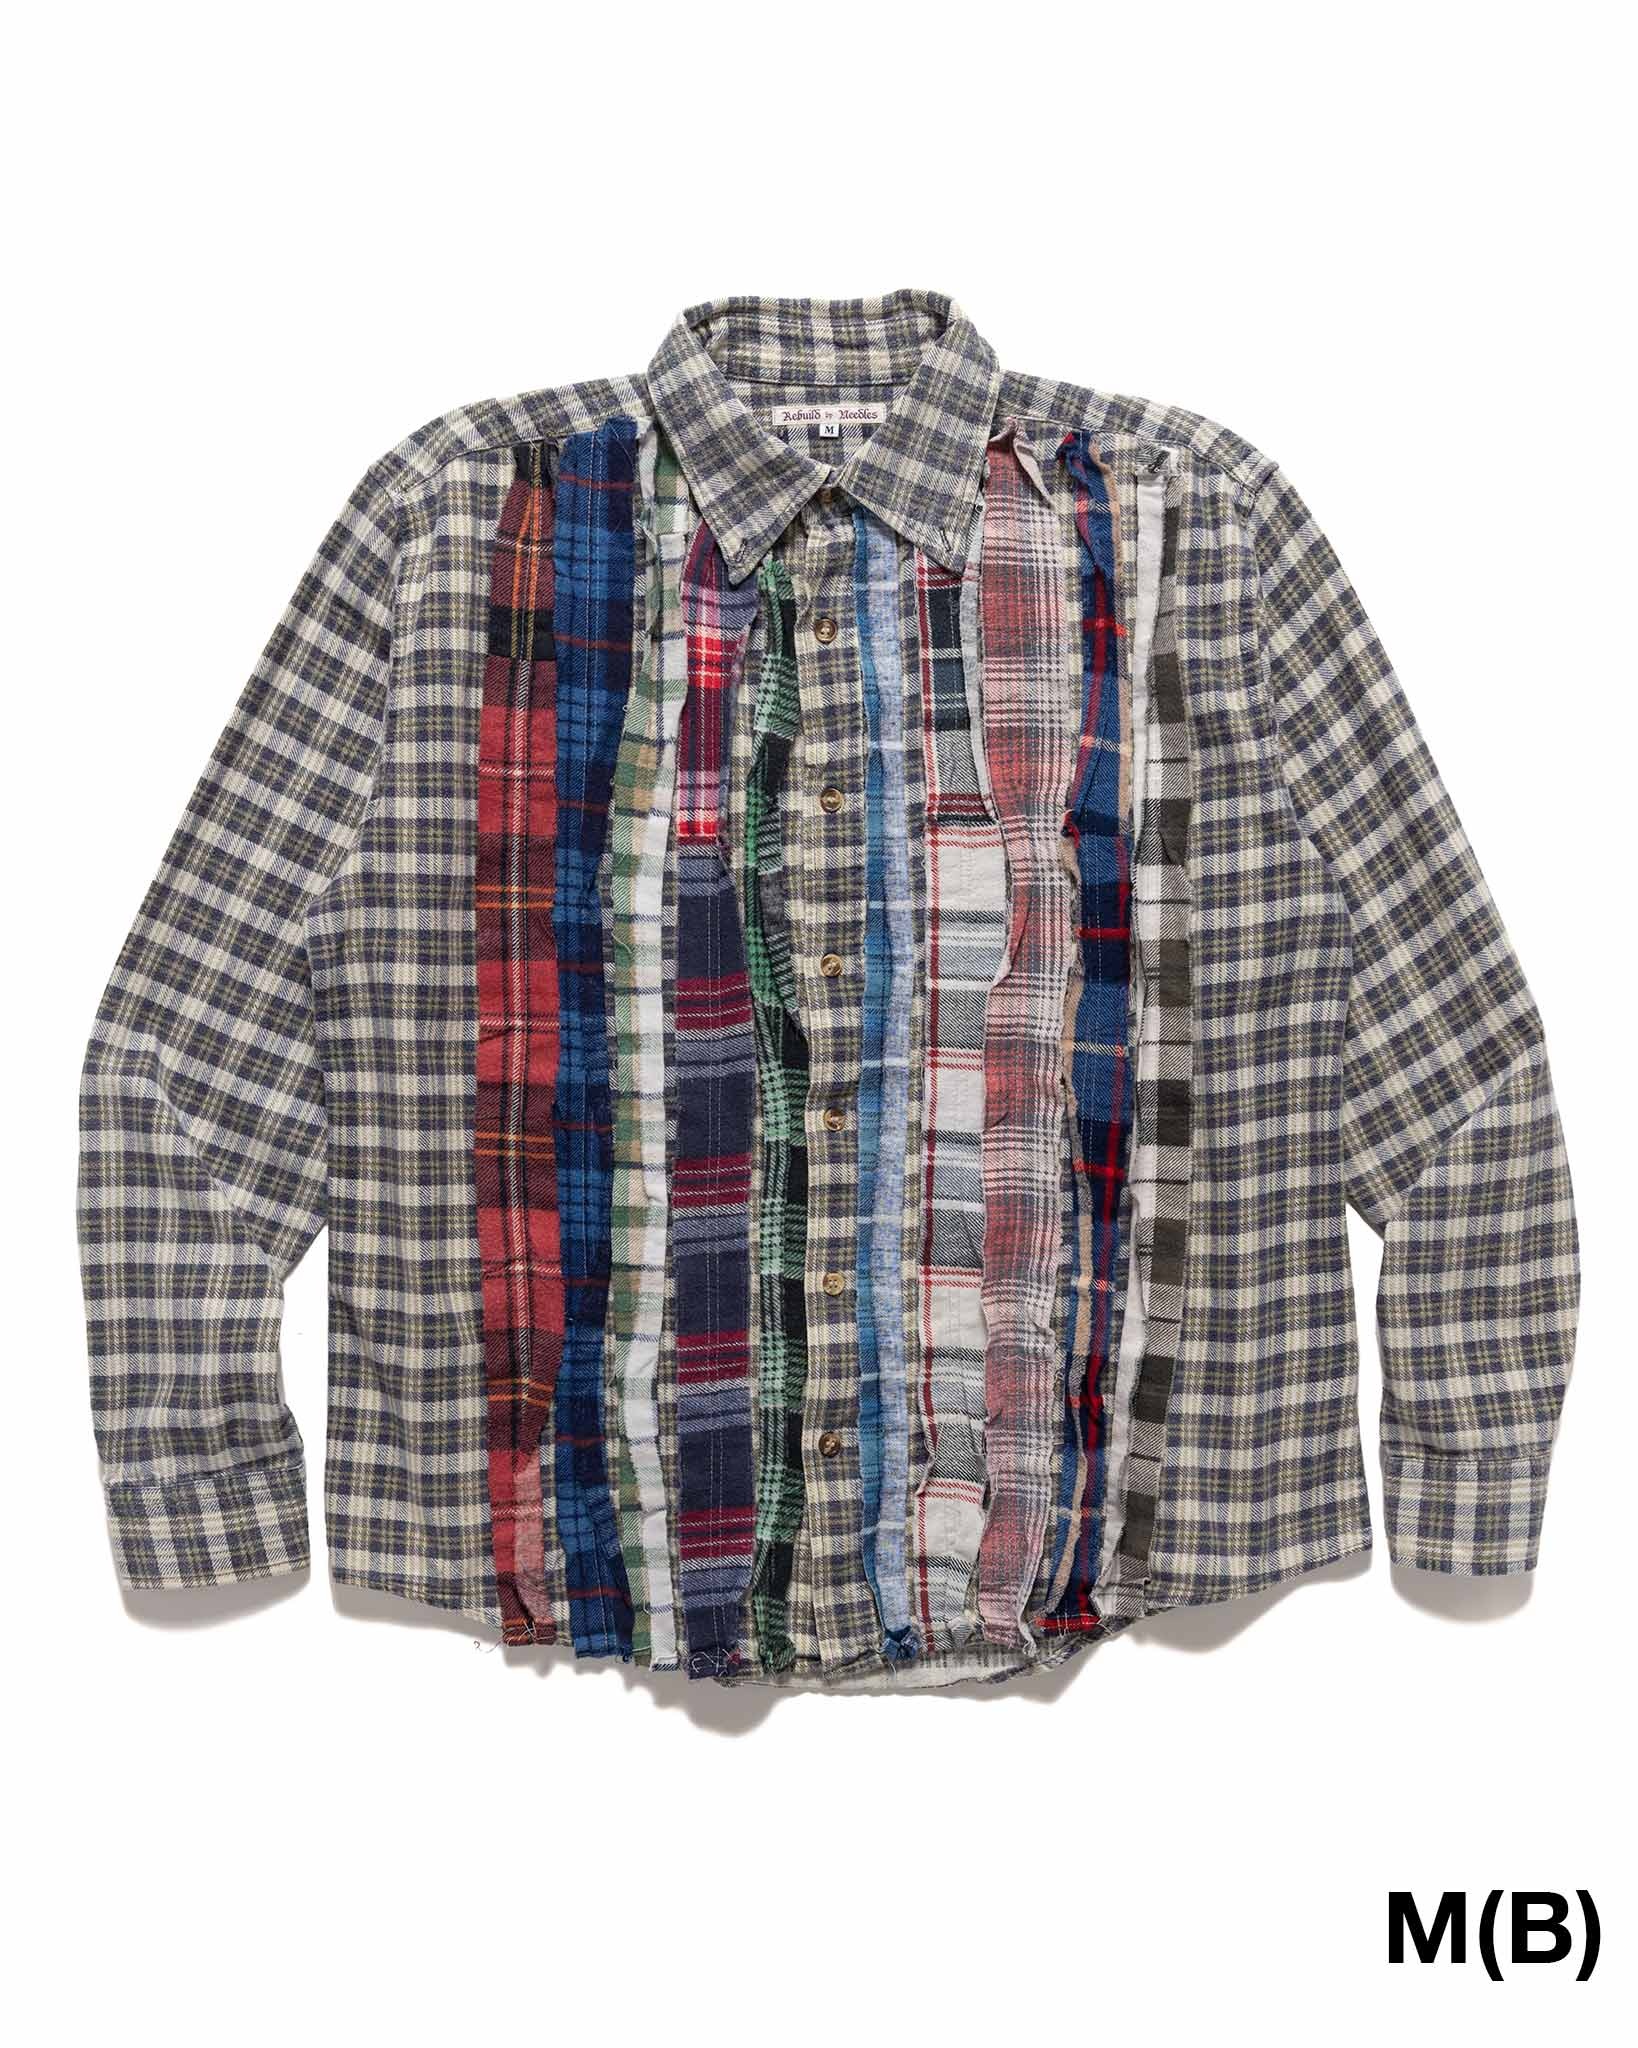 Rebuild by Needles Flannel Shirt -> Ribbon Shirt Assorted - 10